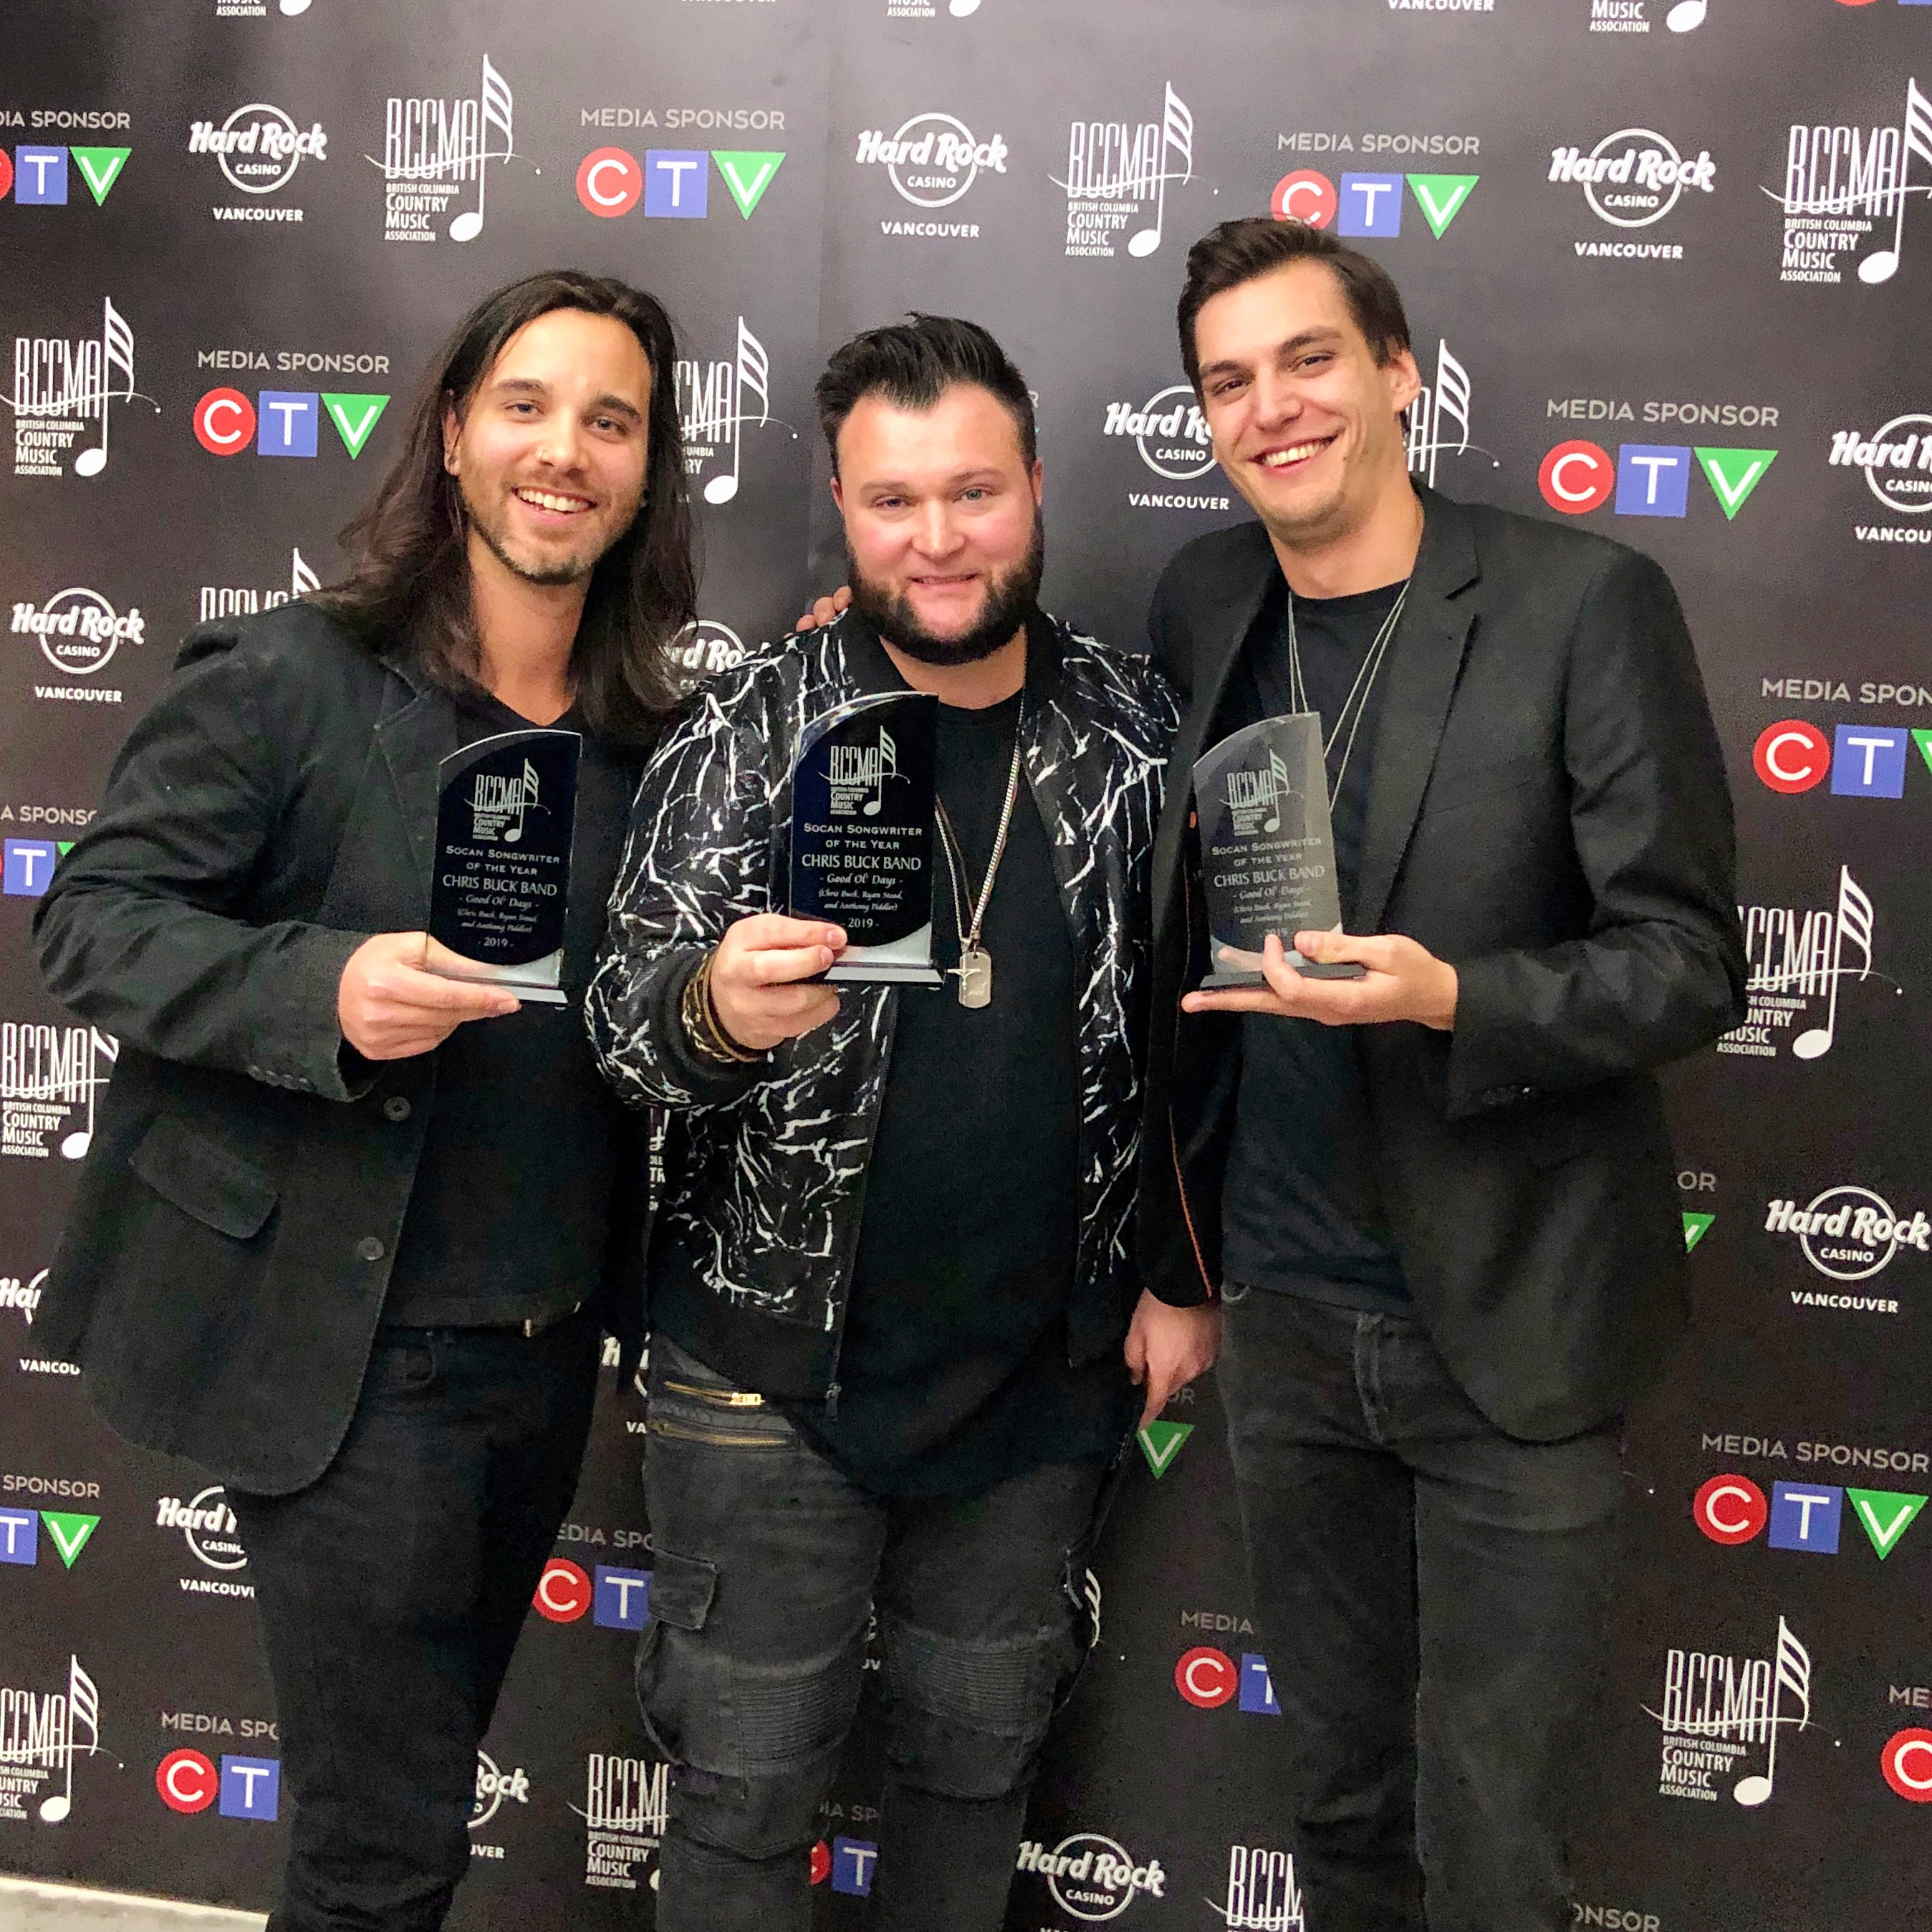 Chris Buck WINS 2019 BCCMA Songwriter of The Year